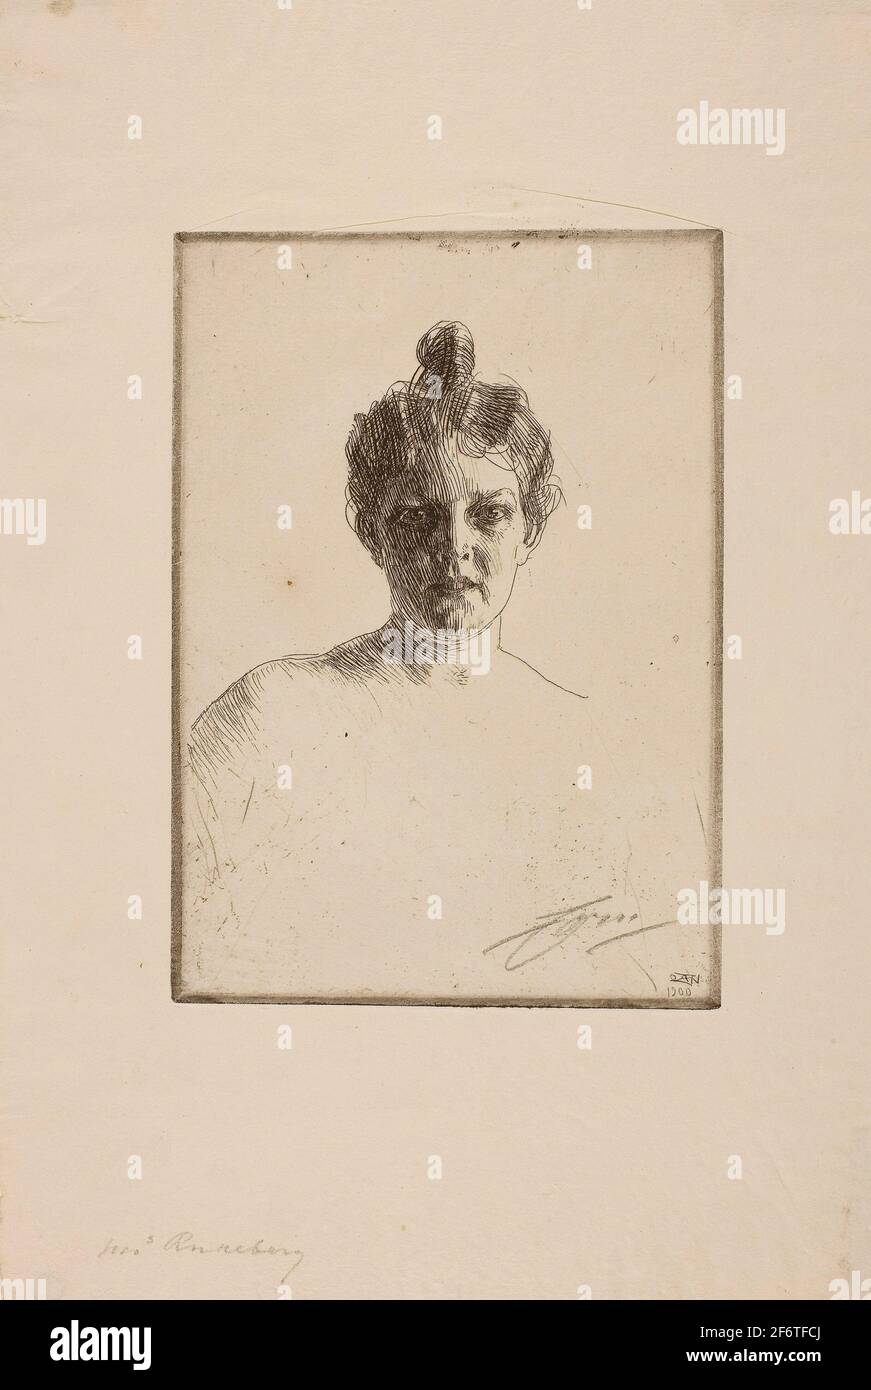 Author: Anders Zorn. Mrs. Runeberg - 1900 - Anders Zorn Swedish, 1860-1920. Etching on ivory wove paper. Sweden. Stock Photo